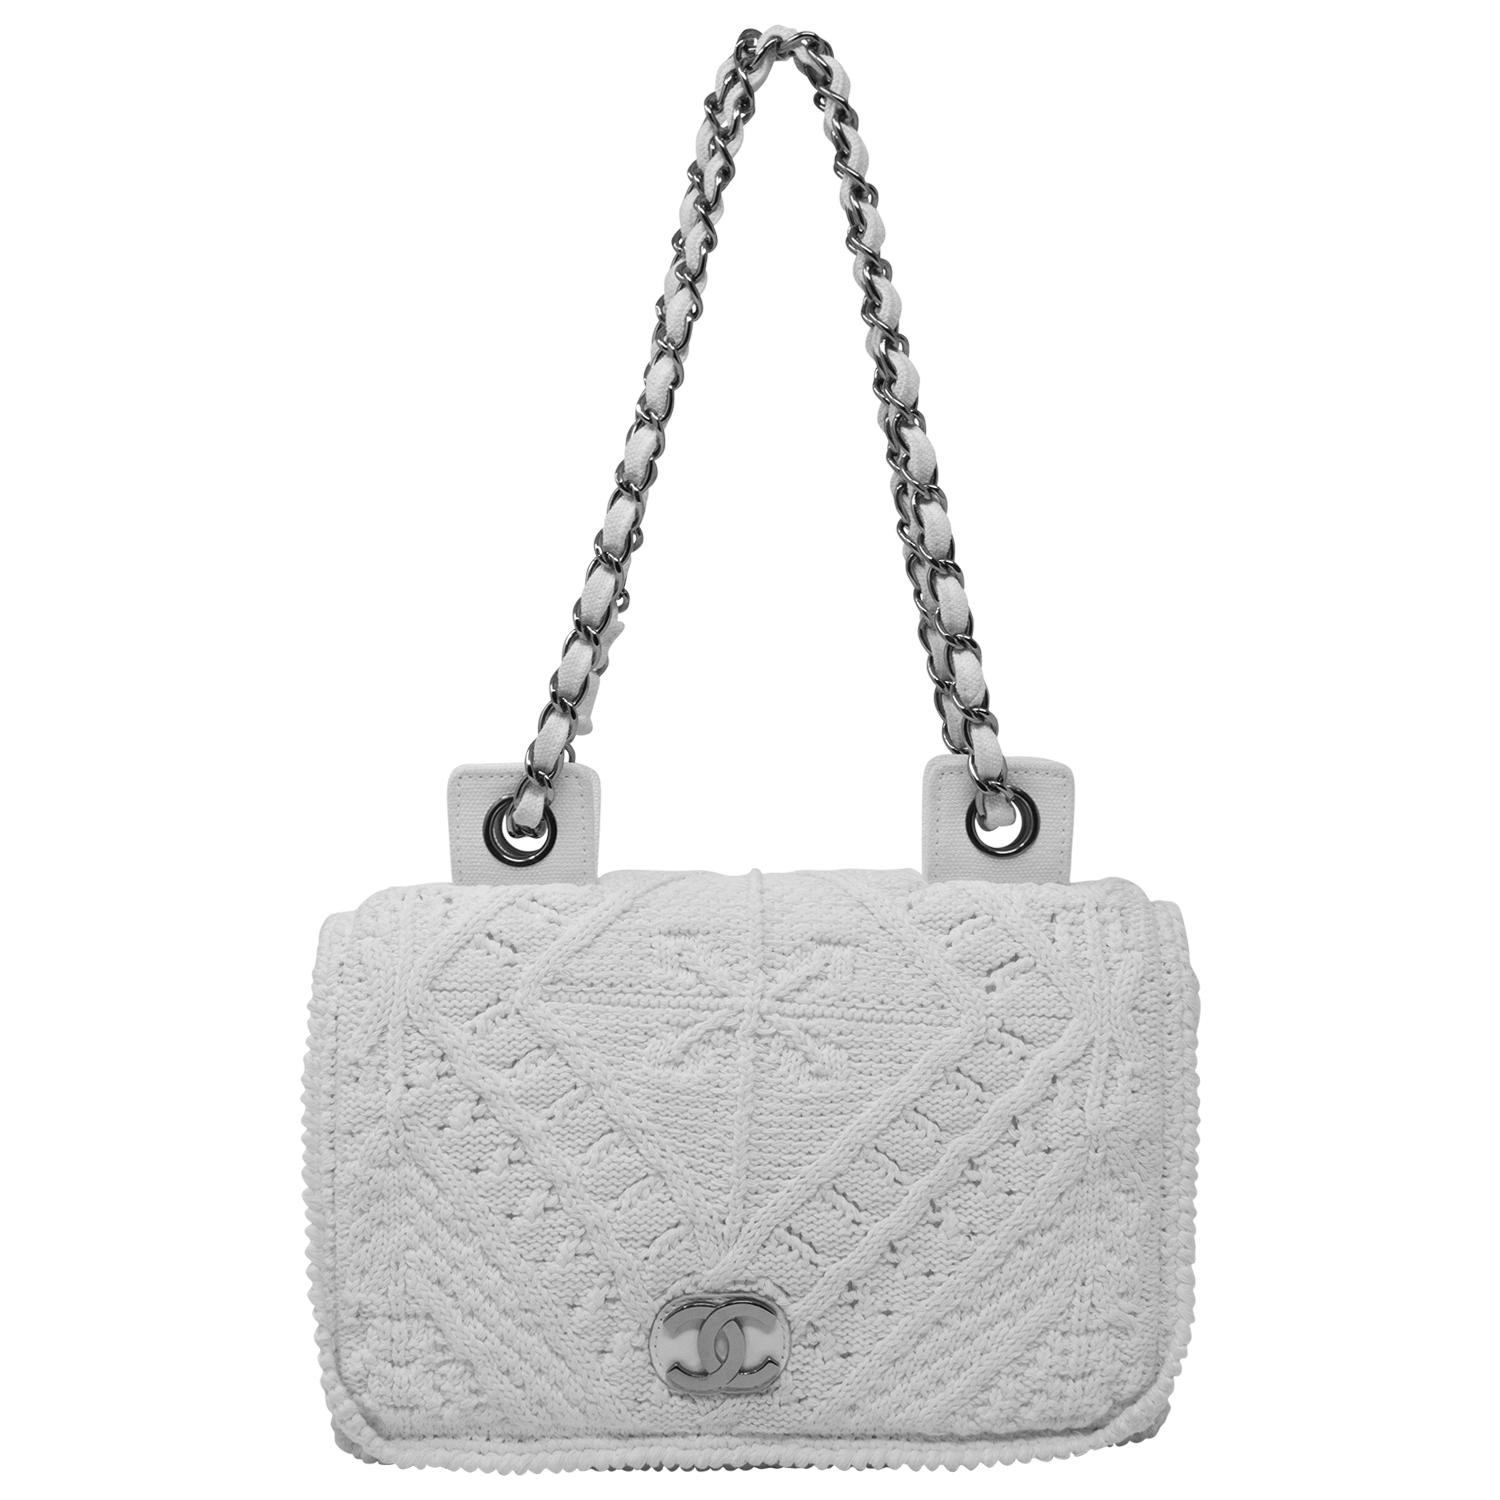 Chanel Limited Edition White Hand Knit Flap Bag